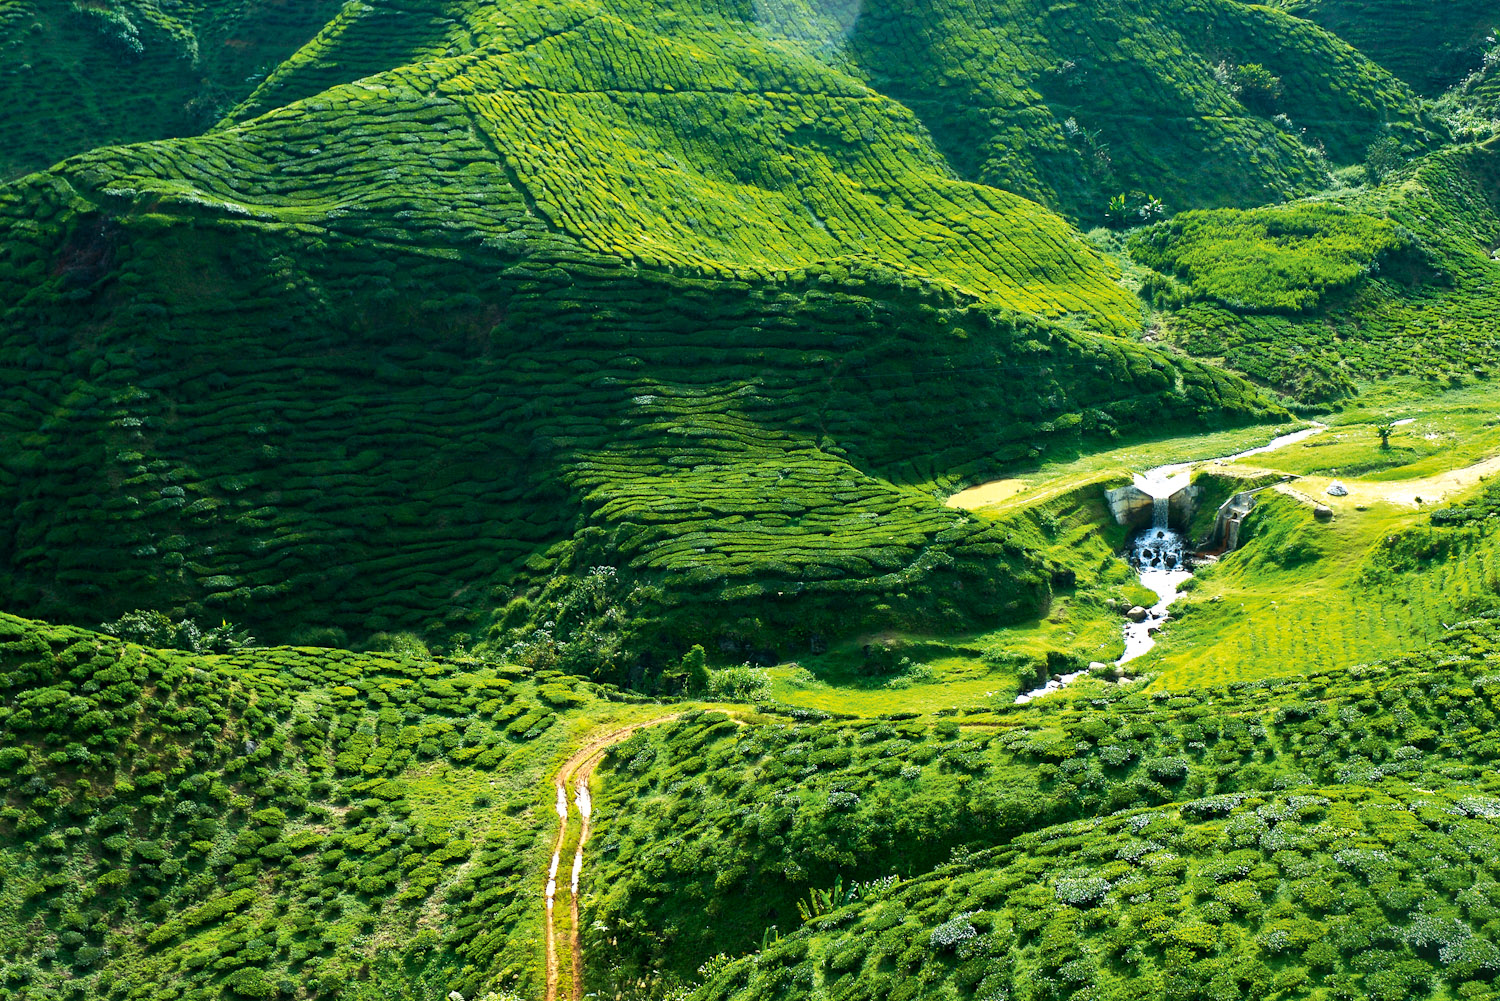 A verdant green, the Cameron Highlands north of Kuala Lumpur is a place of fantastical beauty.